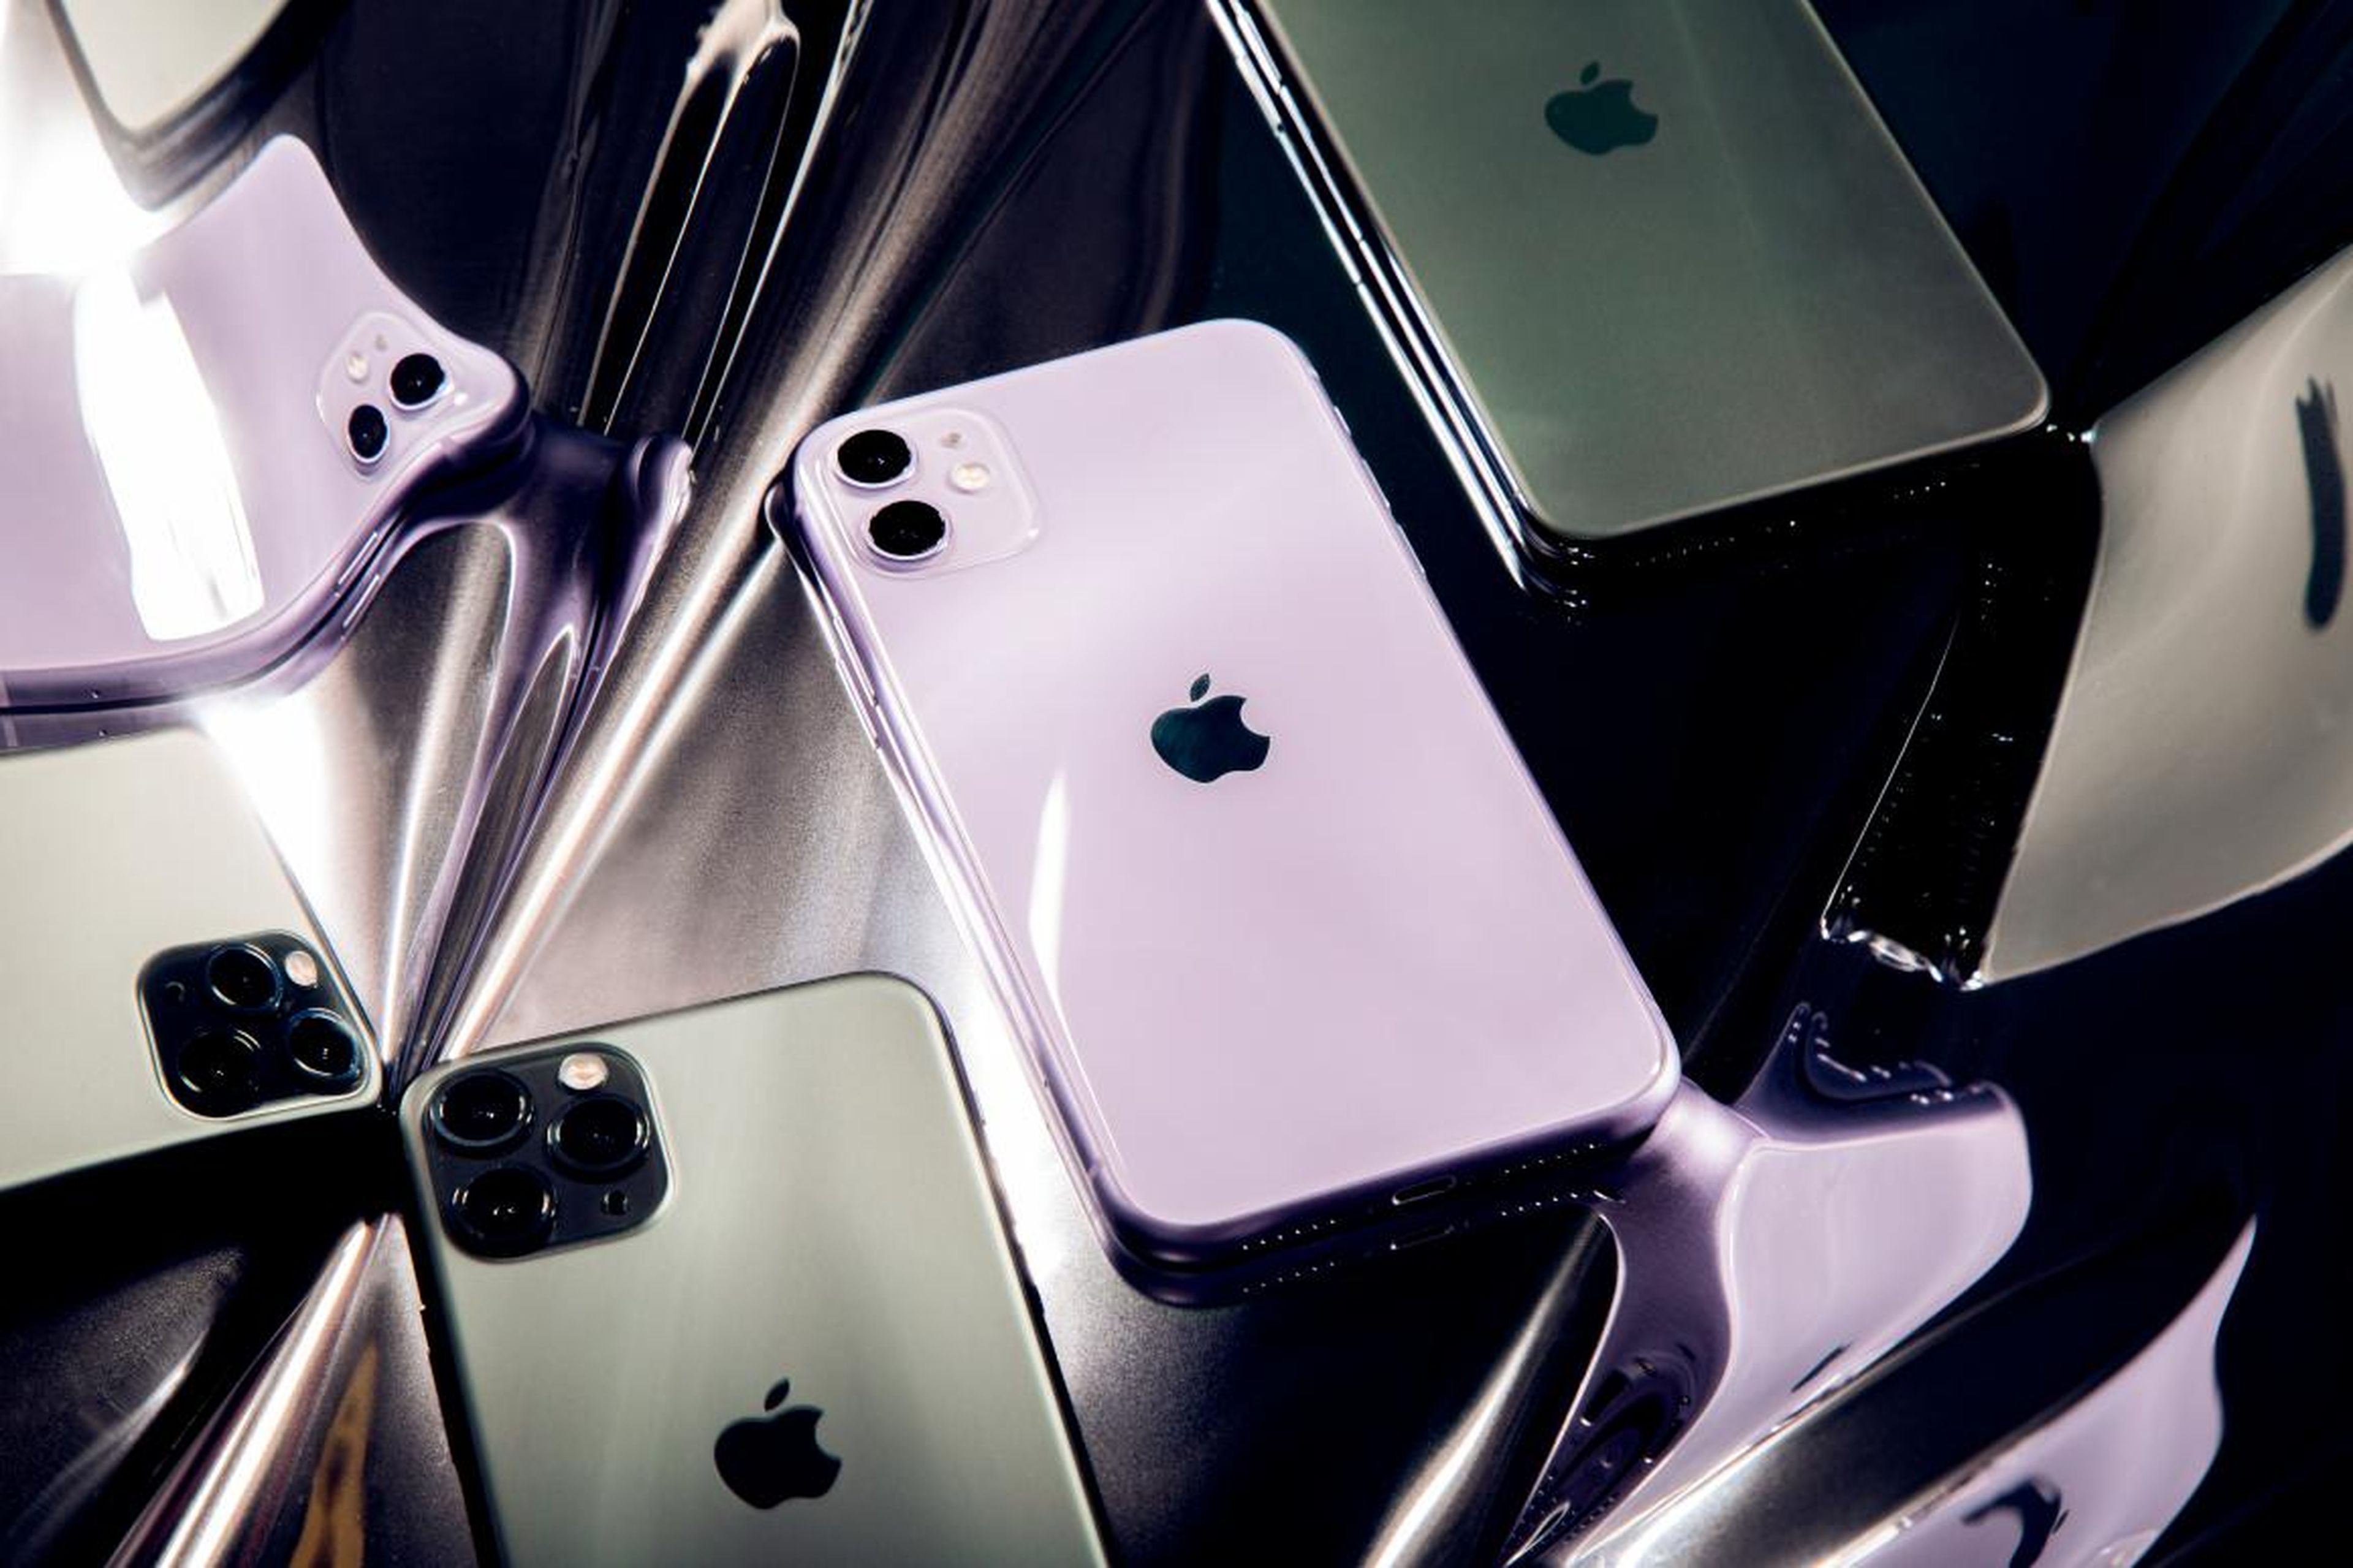 I tried Apple's new iPhone 11 for a few hours to see if it's dramatically different from its predecessor — here's what I found